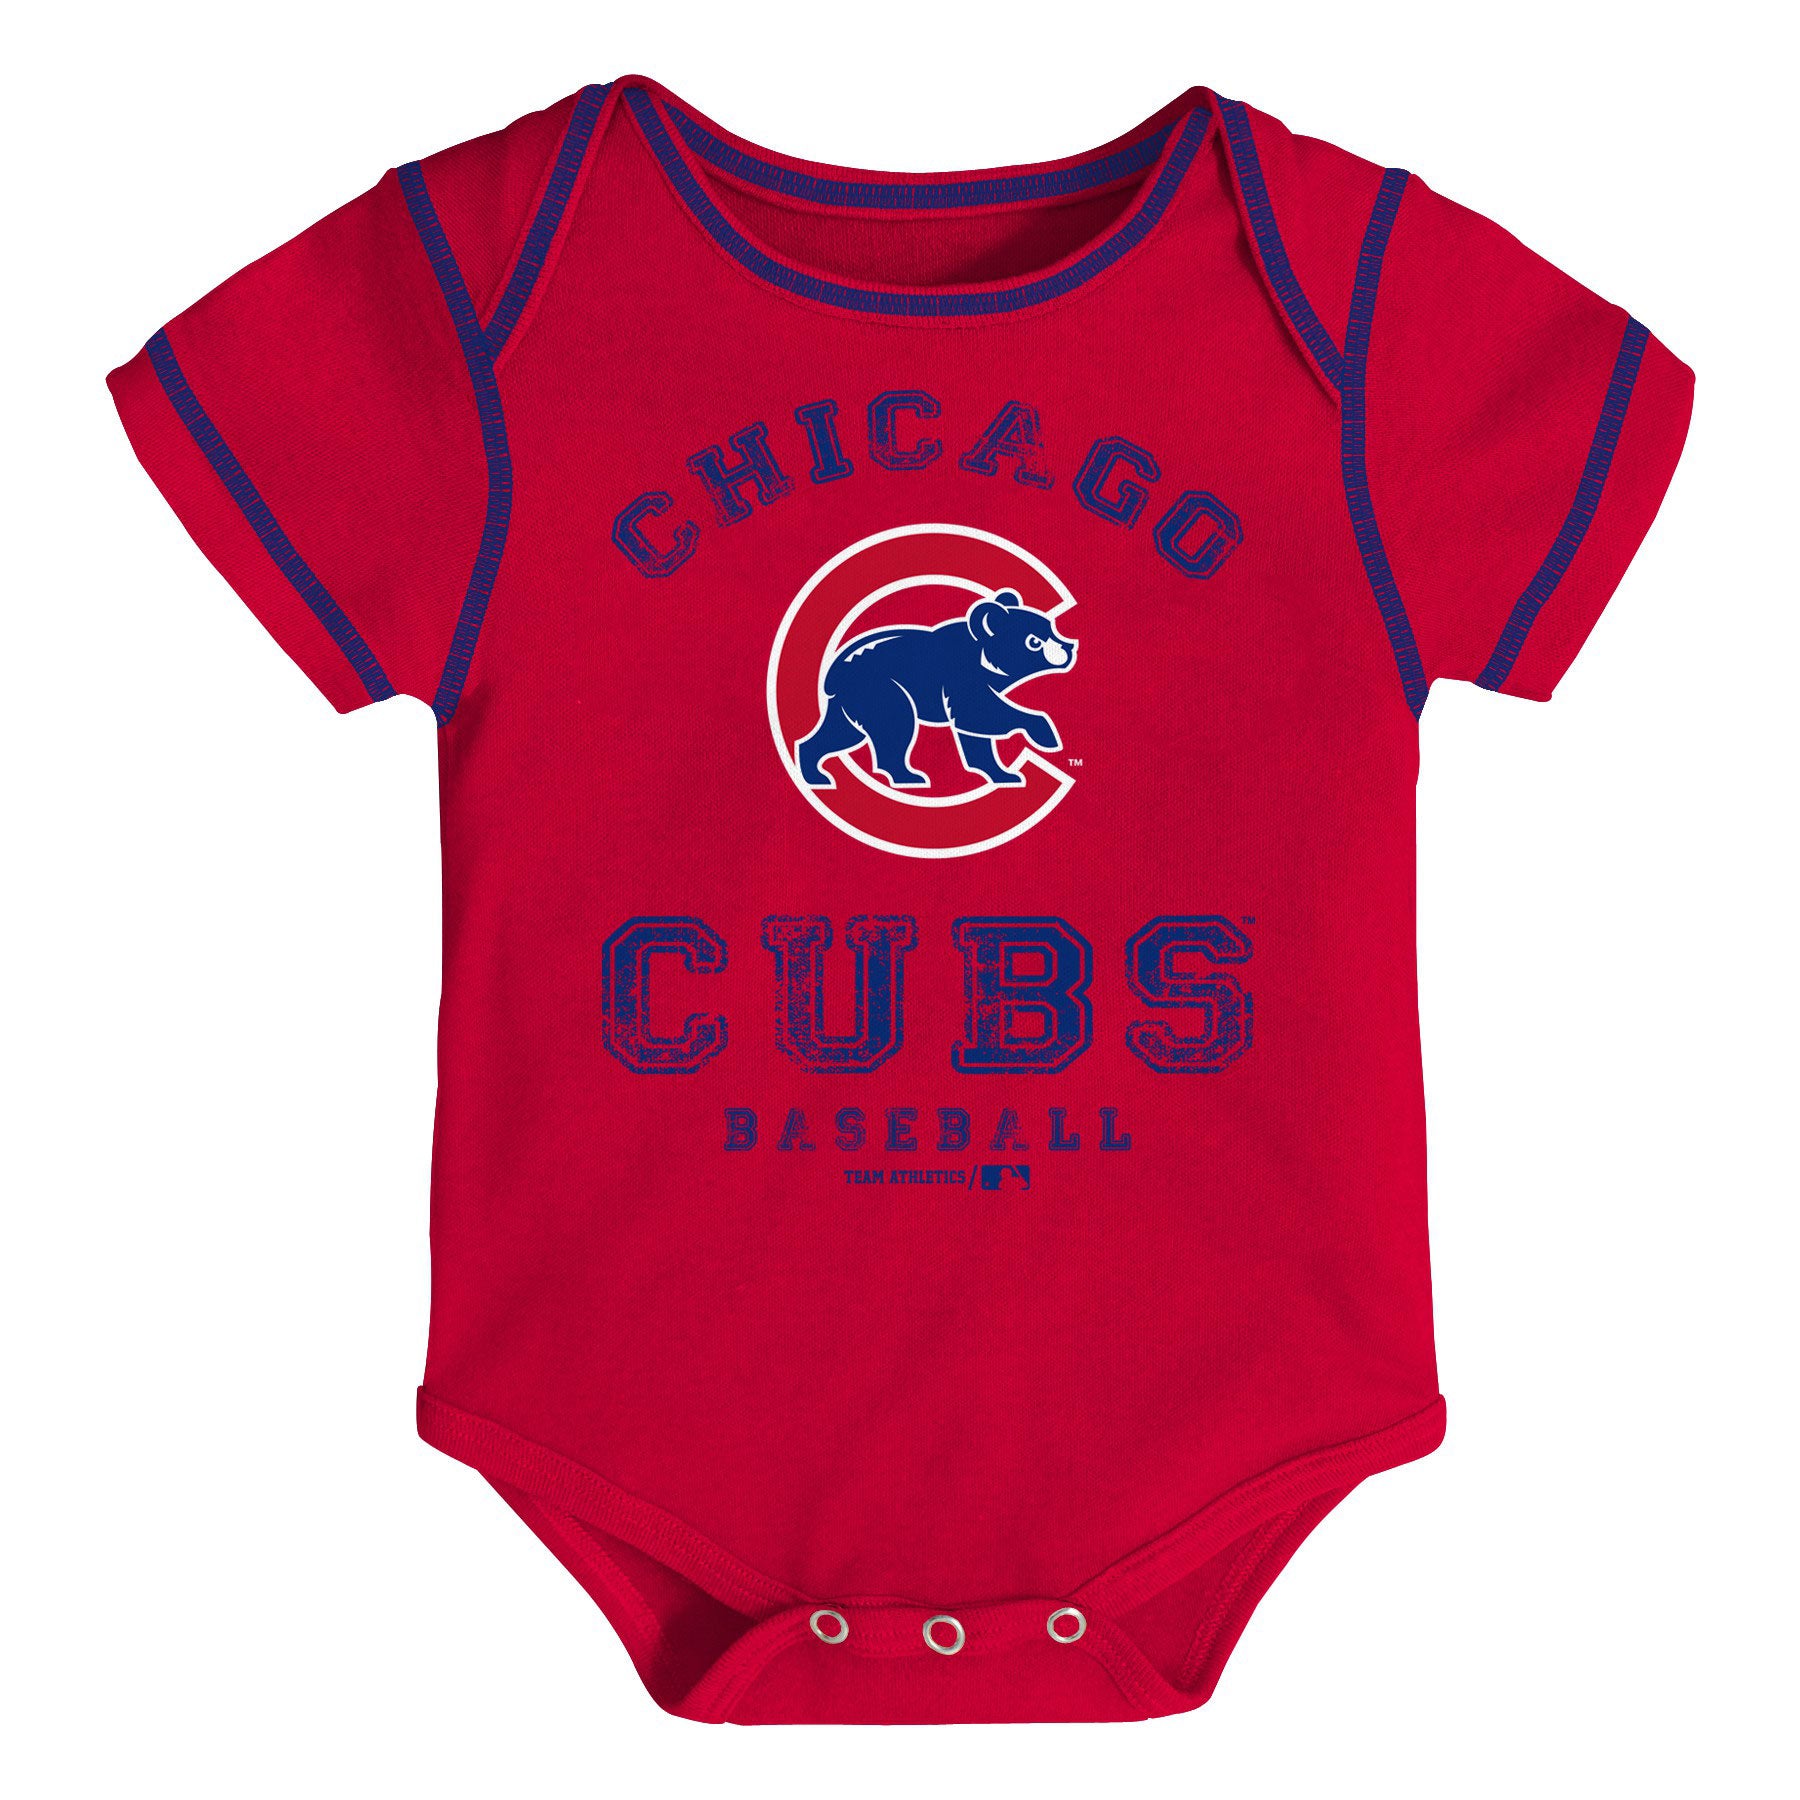 Items similar to Chicago Cubs W bodysuit or shirt on